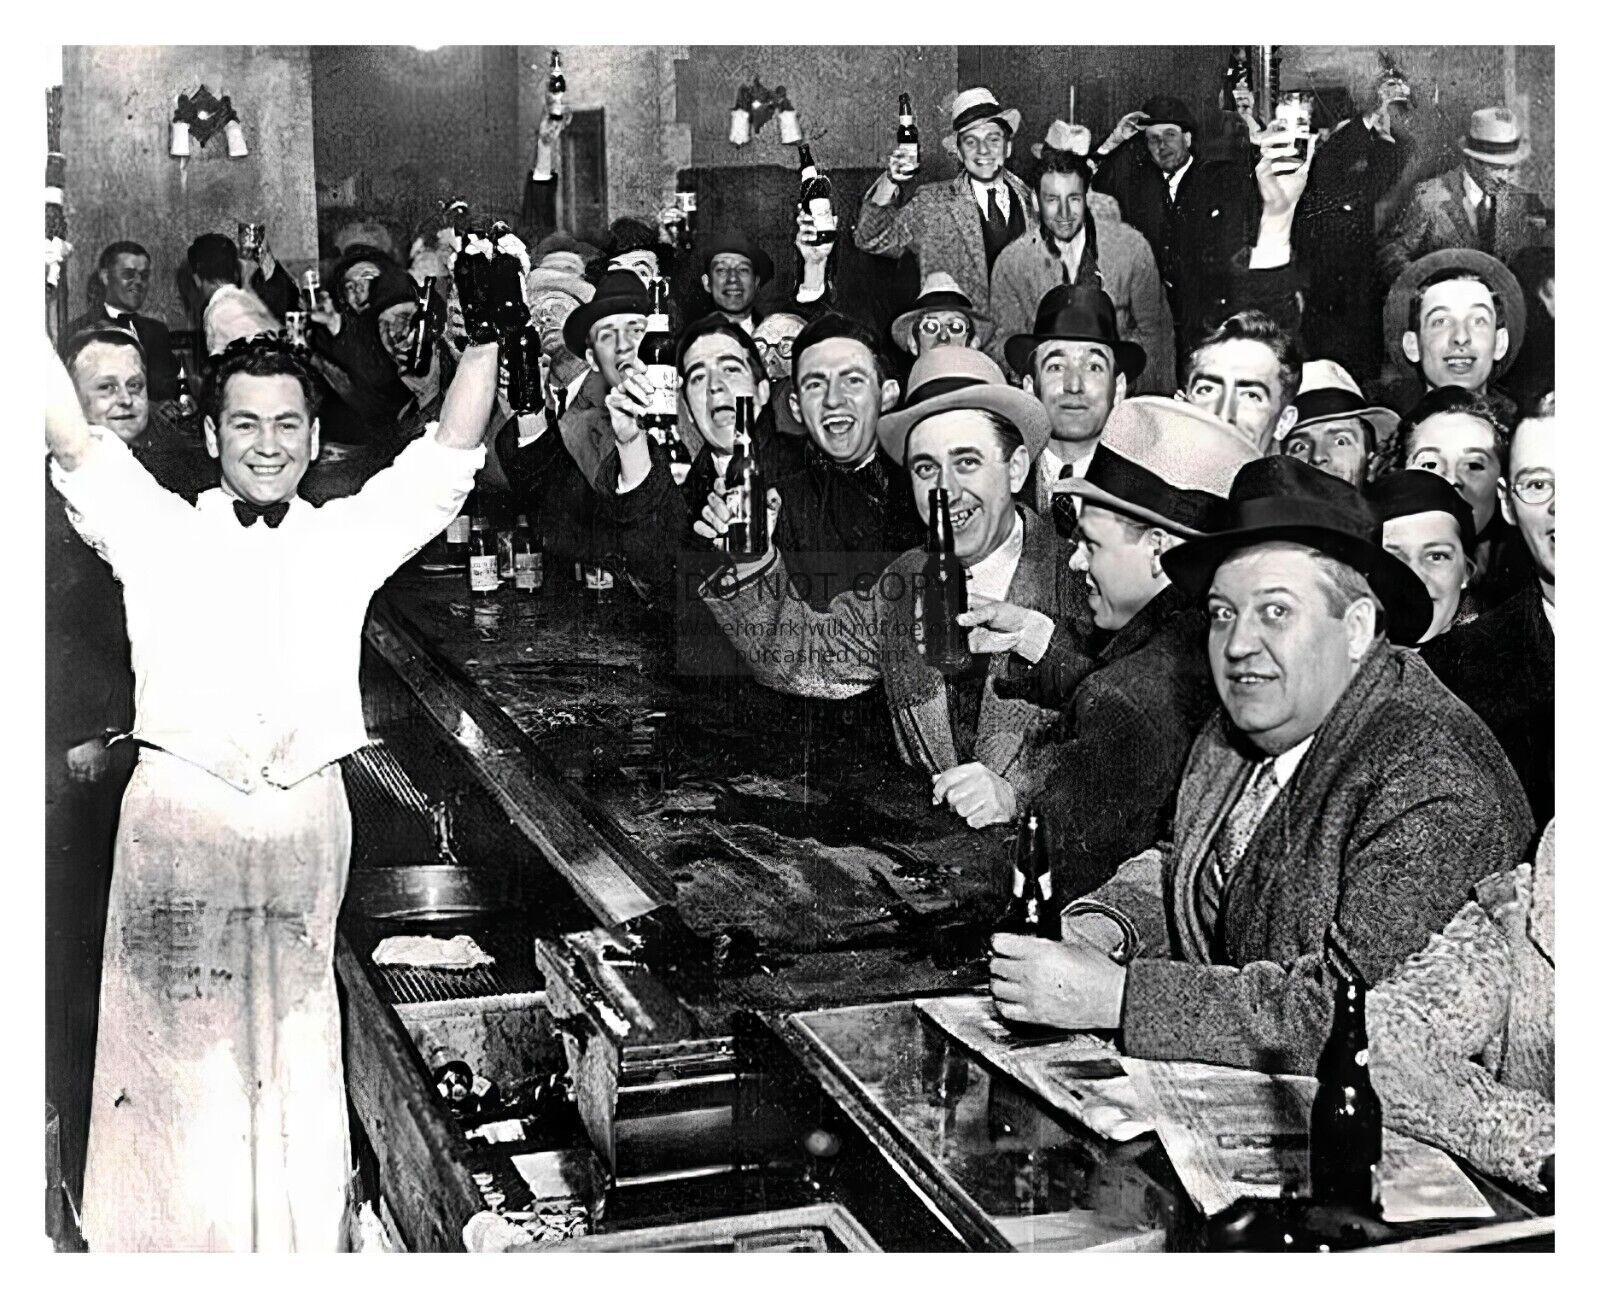 THE NIGHT PROHIBITION ENDED CELEBRATION AT BAR 8X10 PHOTO